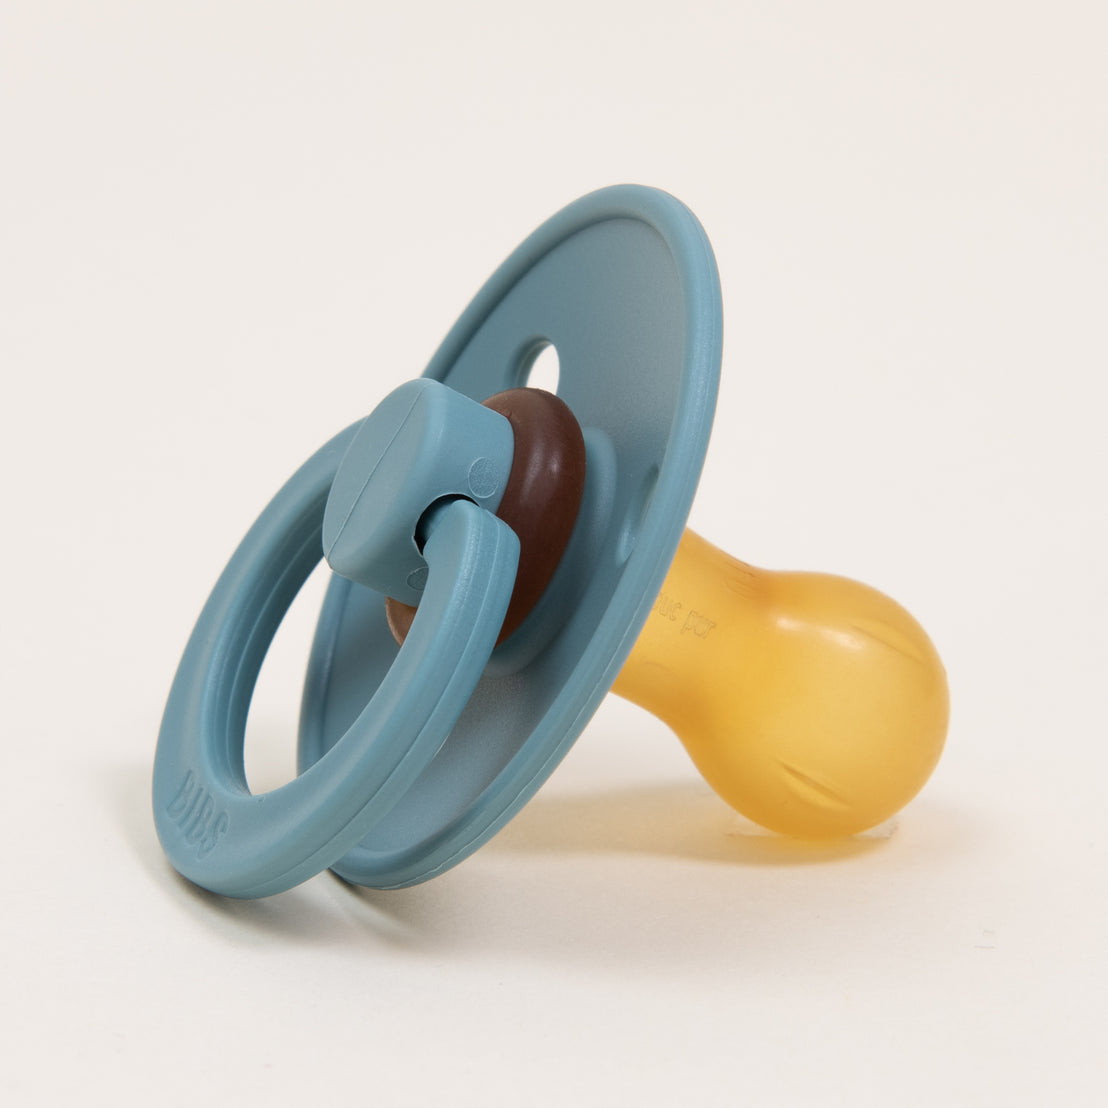 A baby's Bibs Pacifier in Island Sea, designed and manufactured in Denmark, with a teal ring, brown knob, and translucent yellow rubber nipple on a white background.